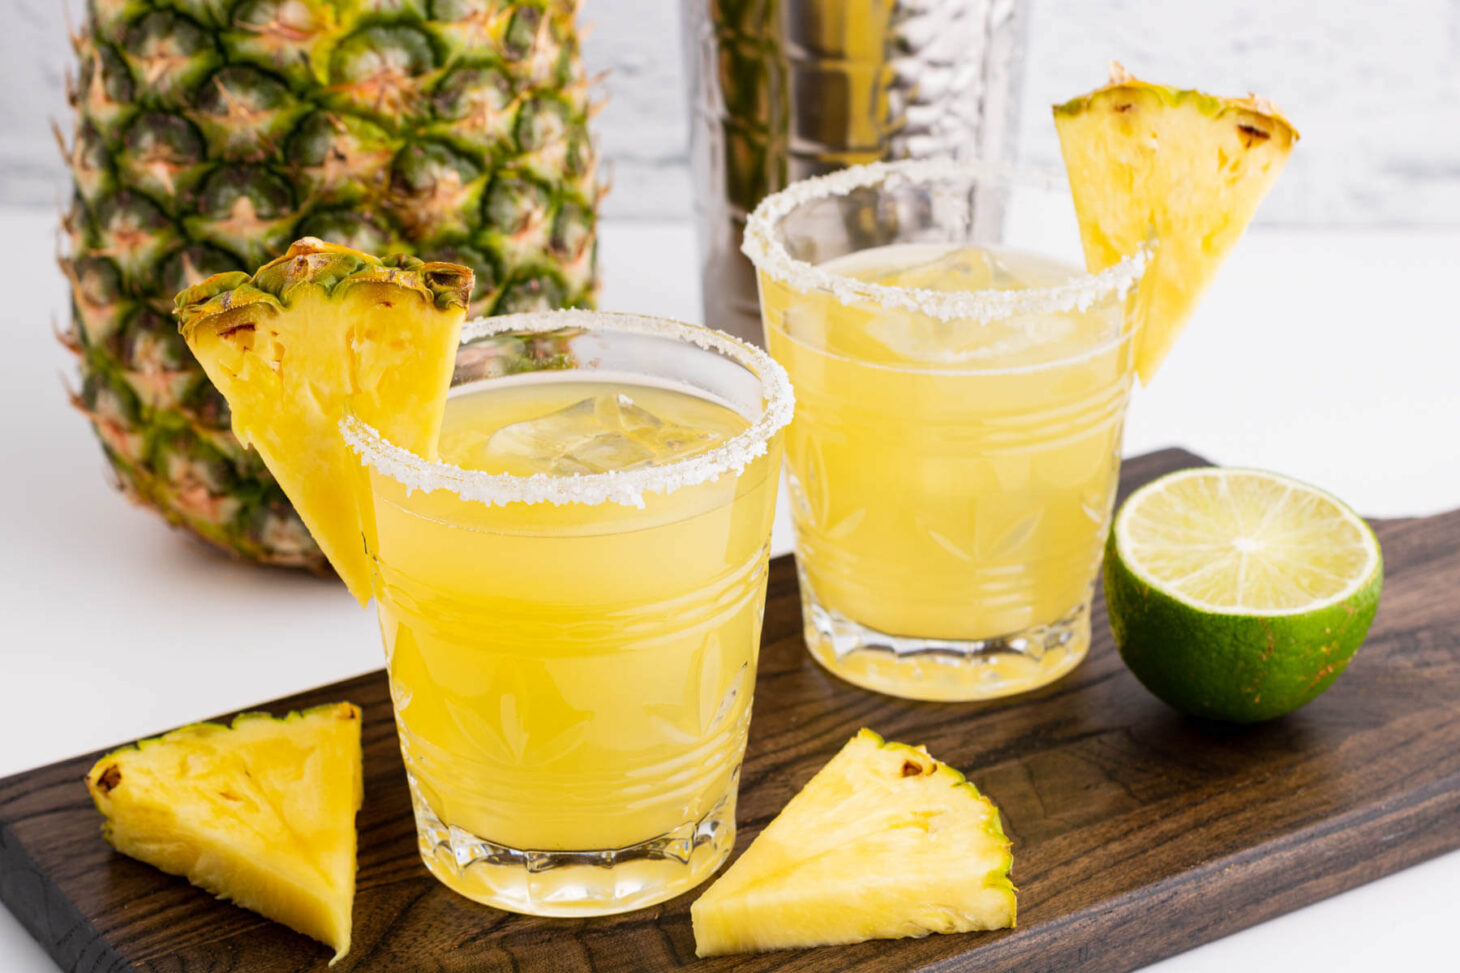 Two rimmed rocks glasses filled with ice and pineapple margarita. Garnished with a slice of pineapple.